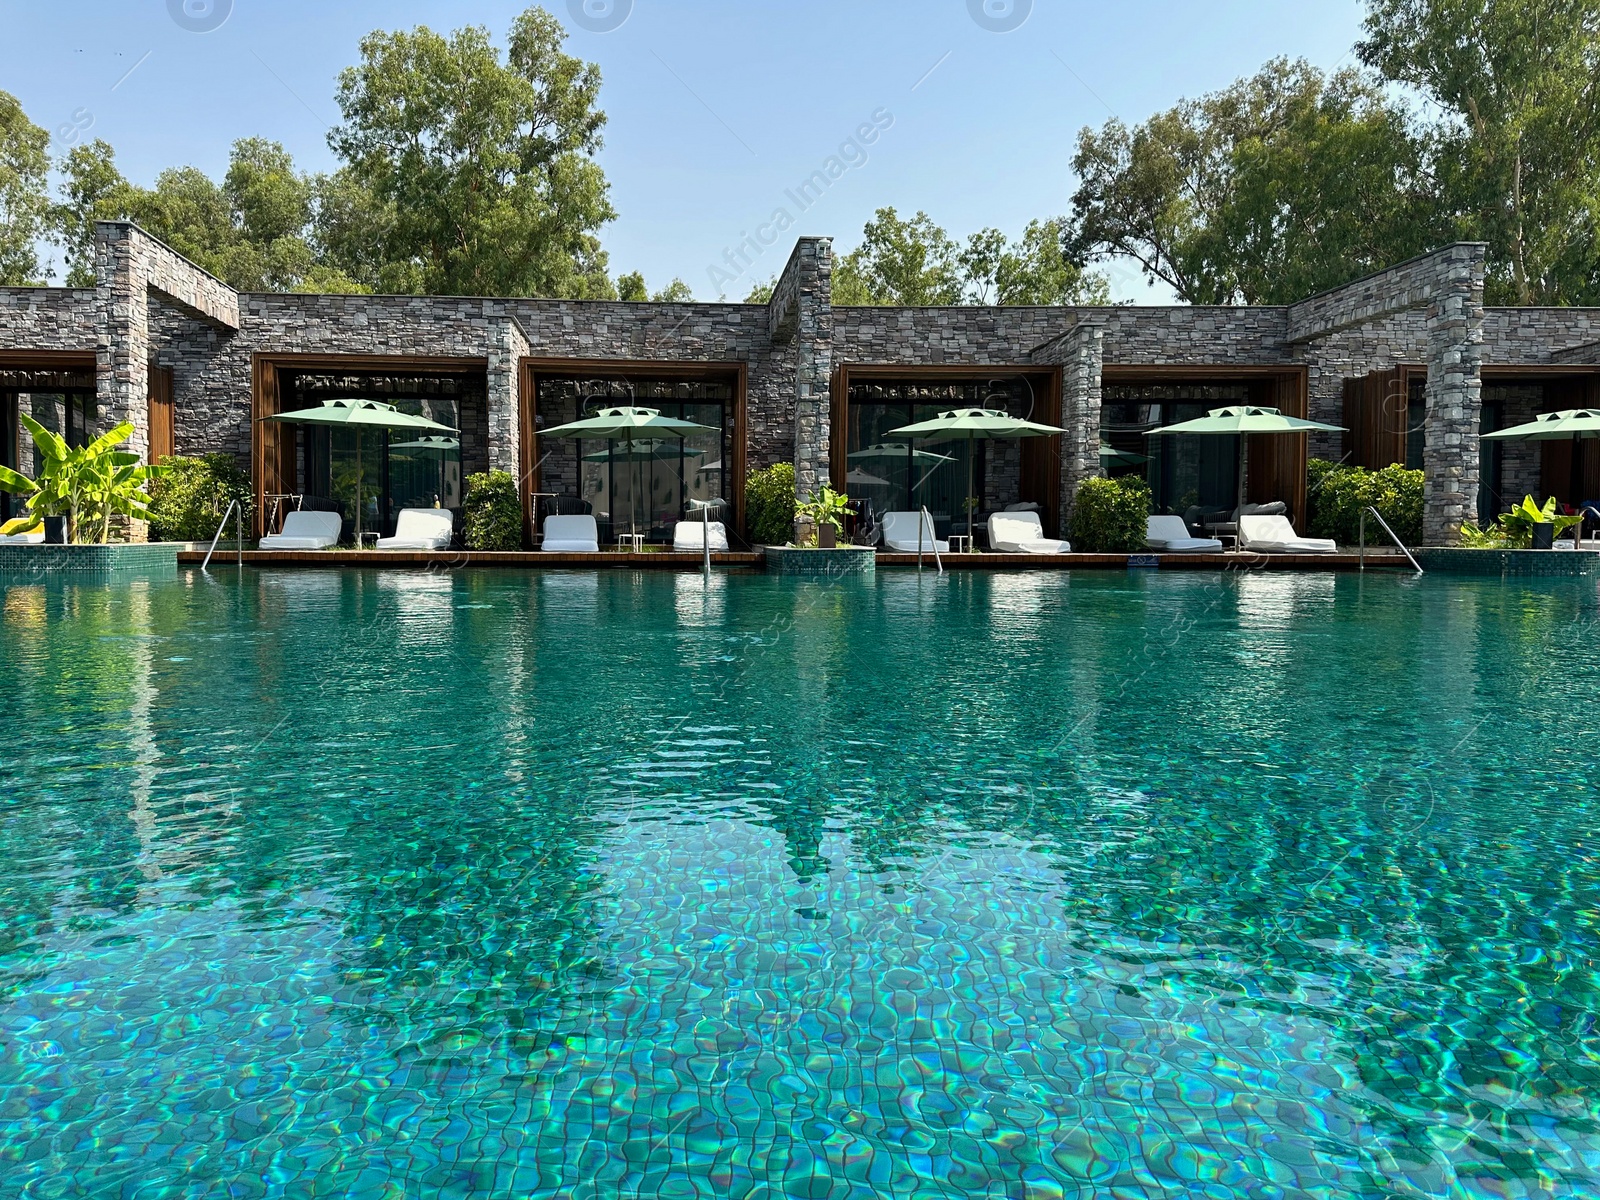 Photo of Swimming pool, exotic plants, umbrellas and sunbeds at luxury resort